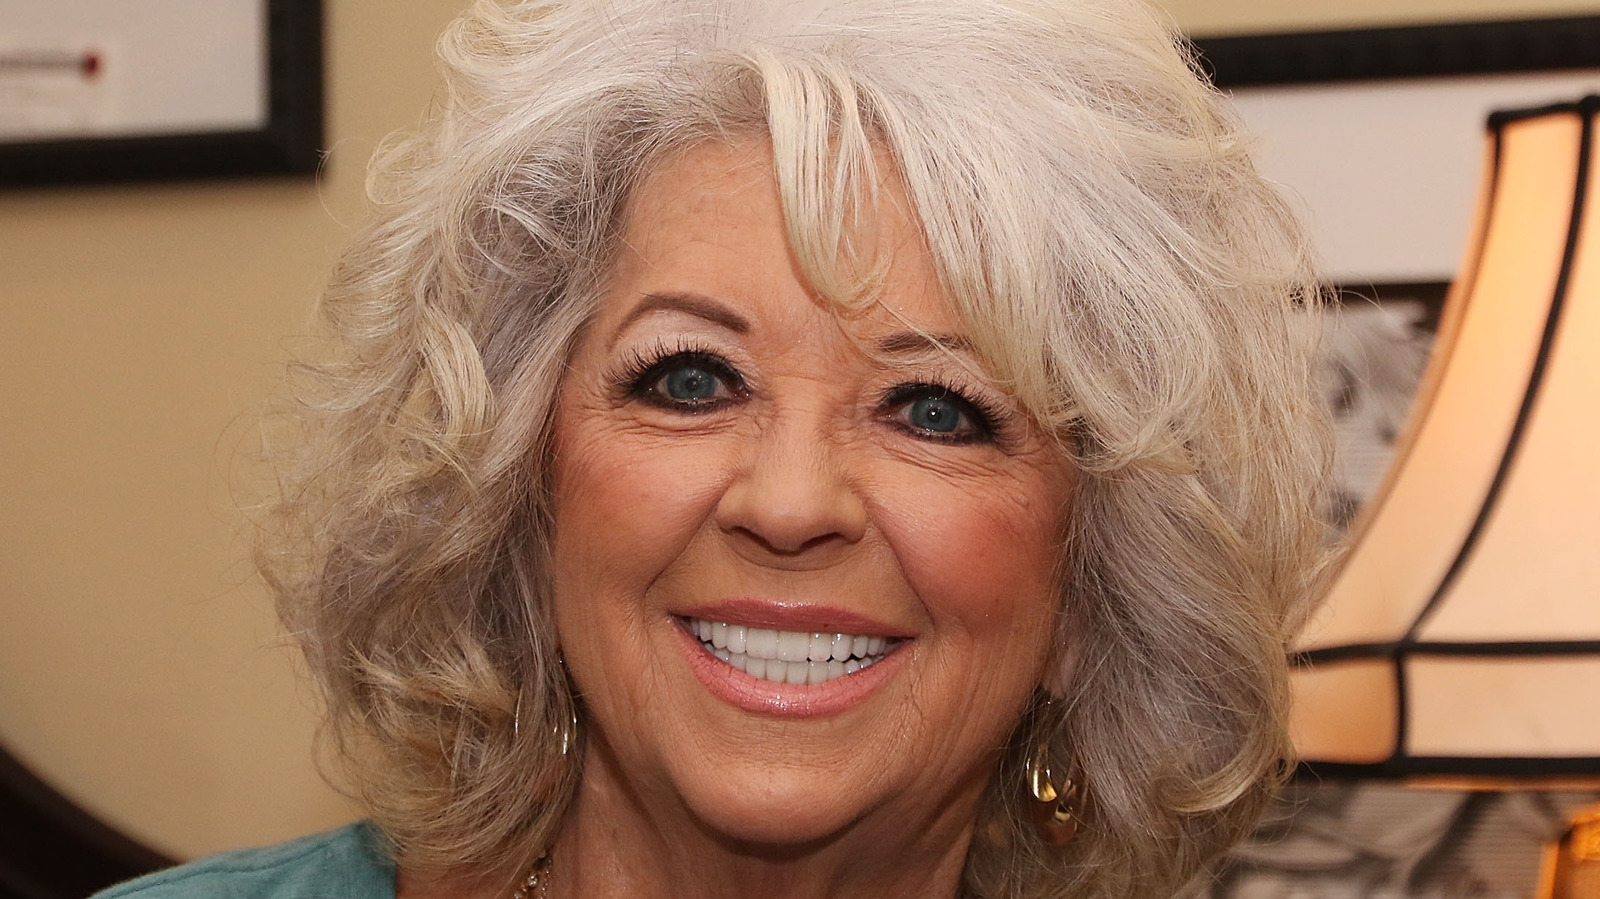 Paula Deen returns to TODAY, talks racism scandal: 'I disappointed myself